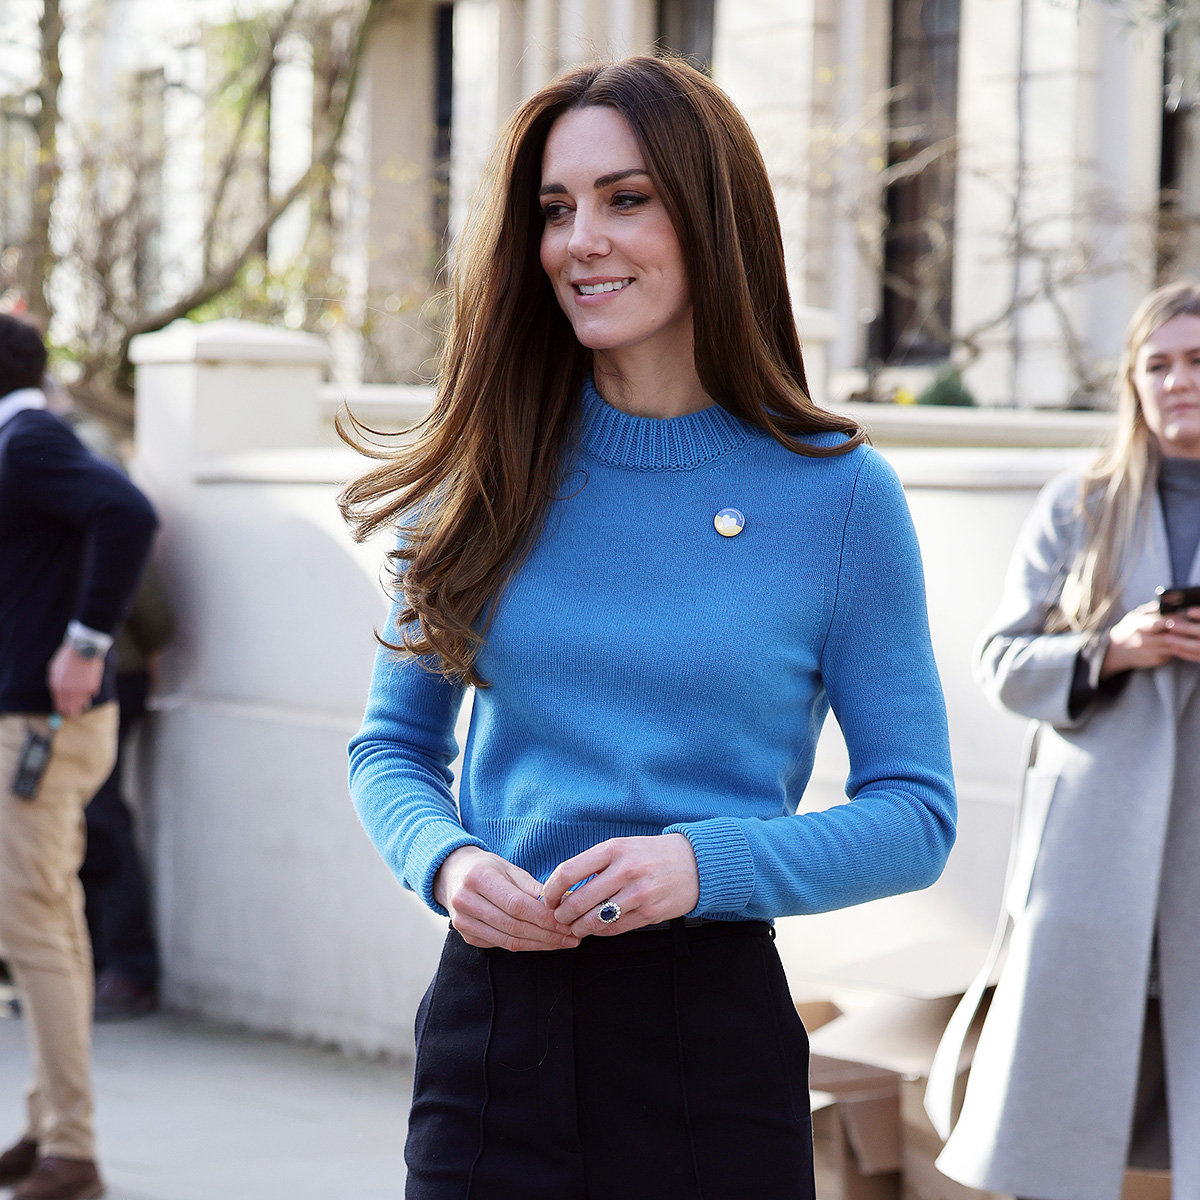 Kate Middleton's 'Puddle Pants' - Jigsaw Navy Wide Leg Trousers